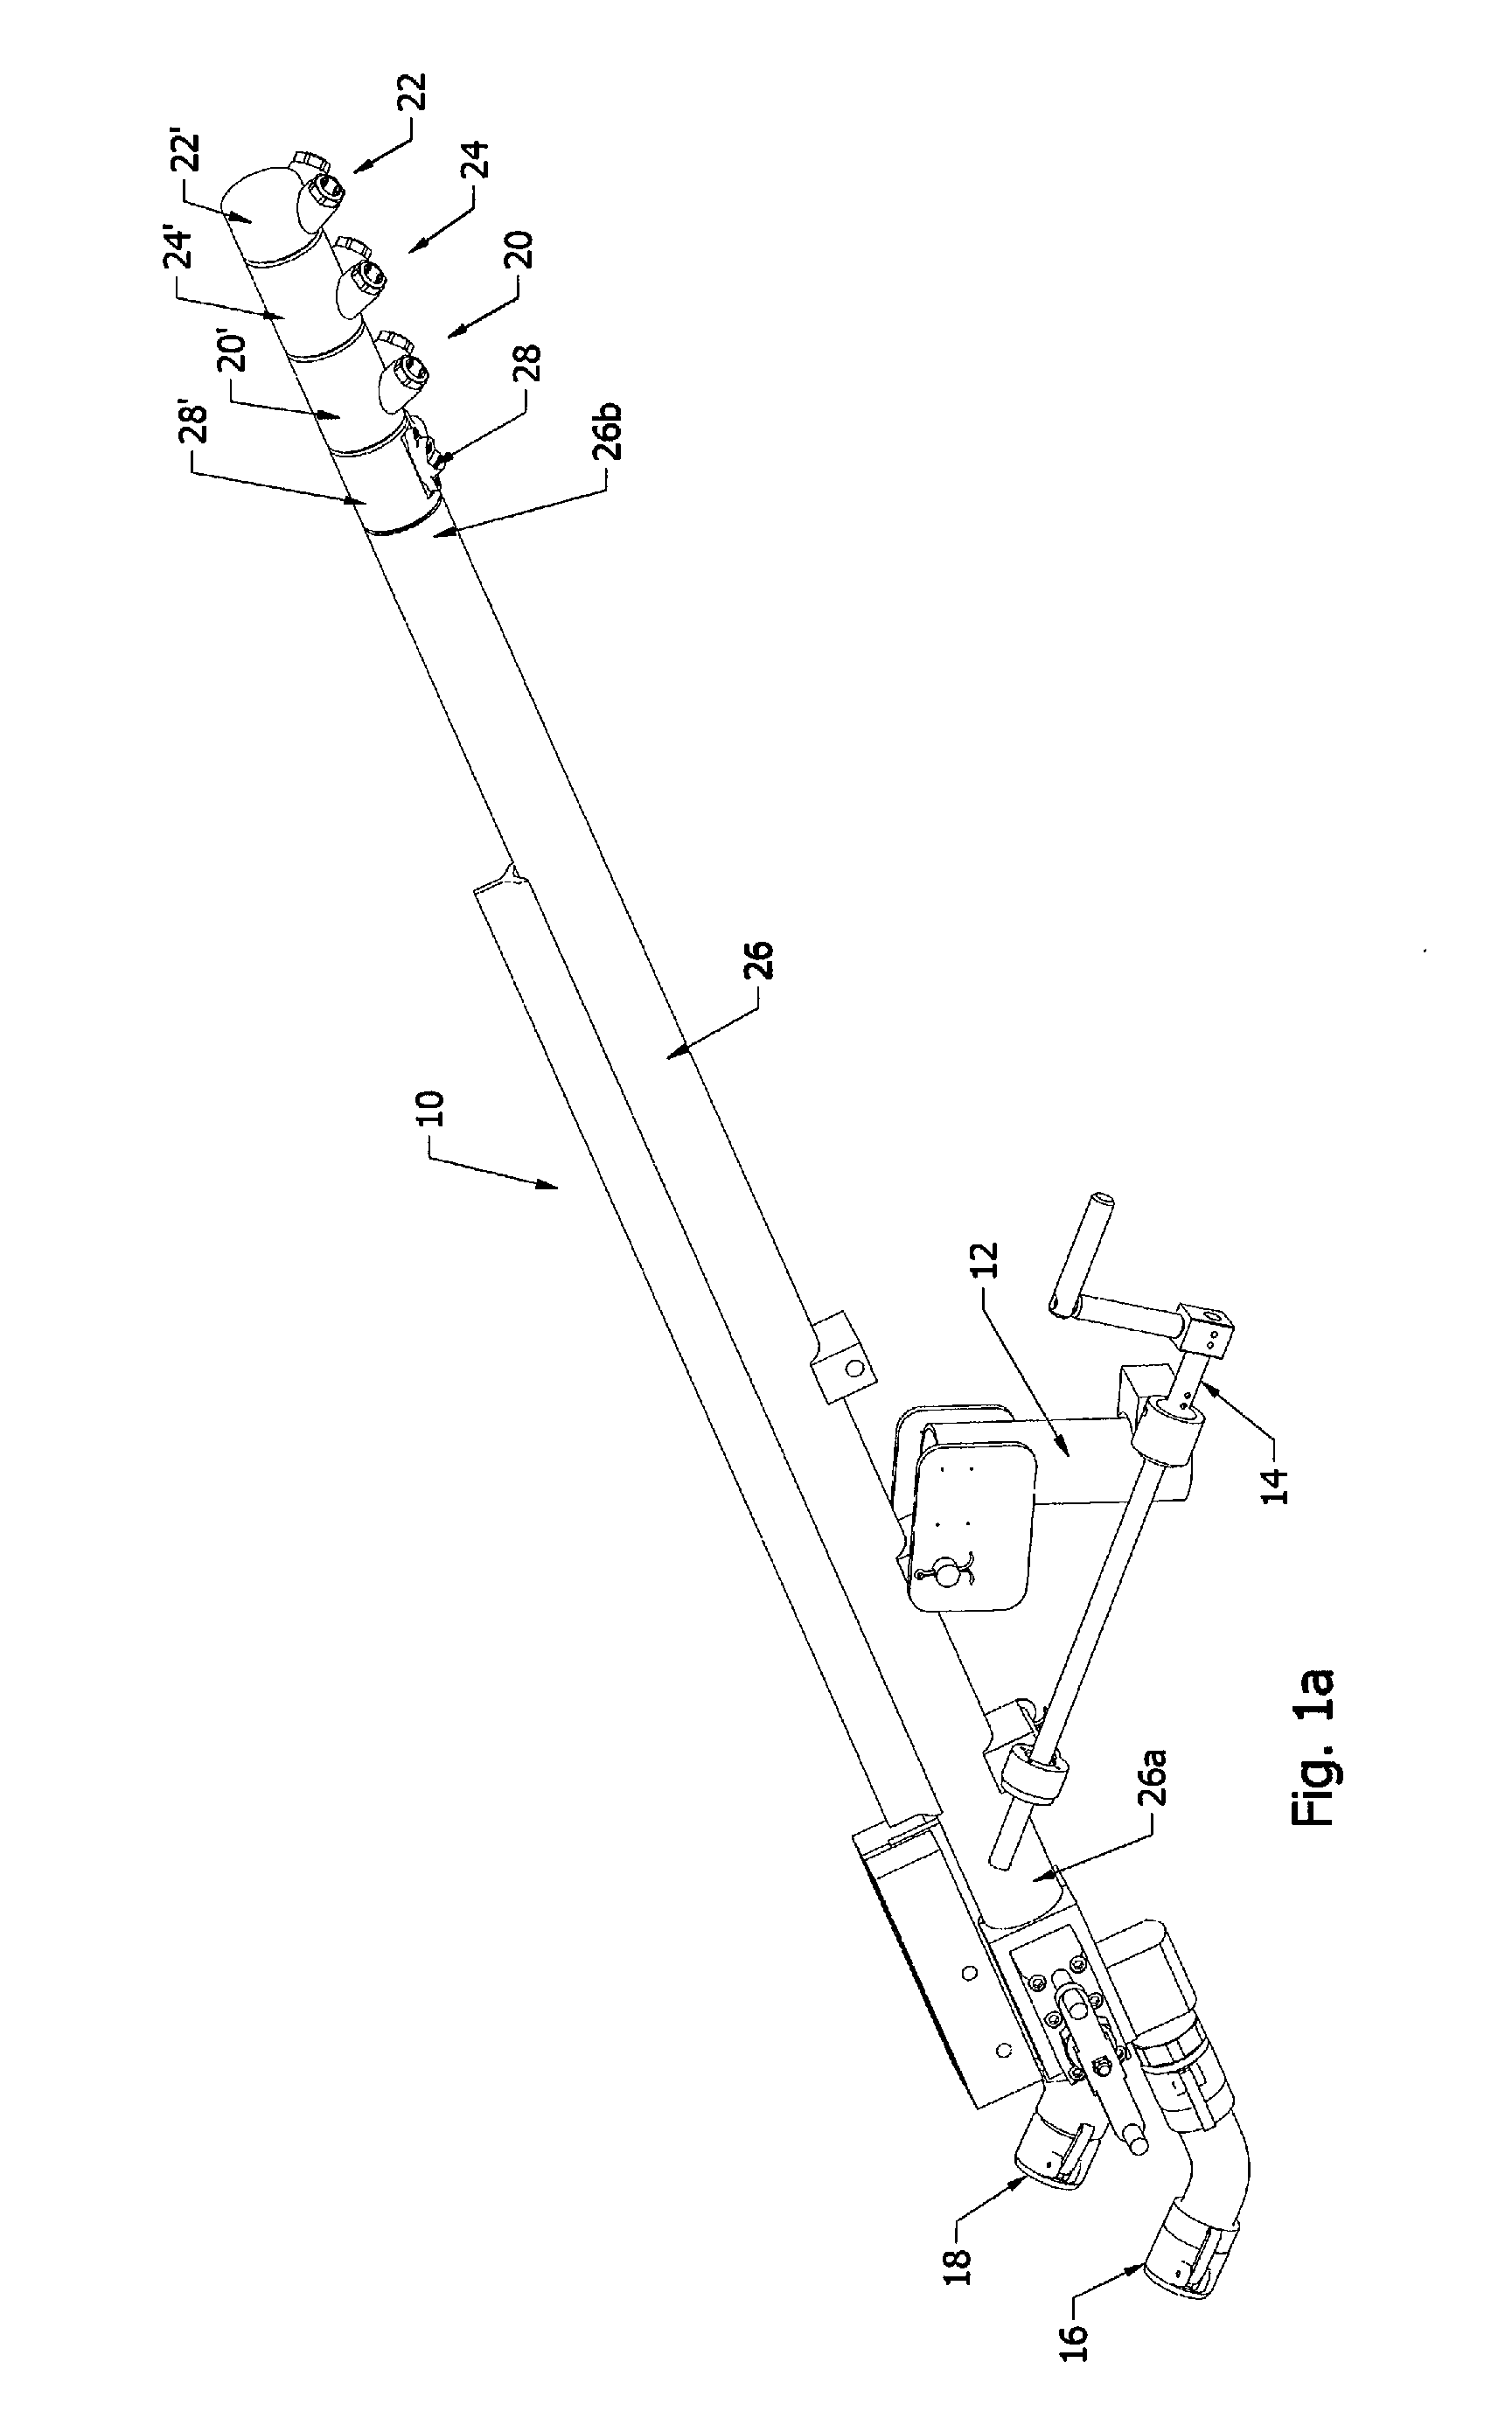 Snow Making Apparatus and Method